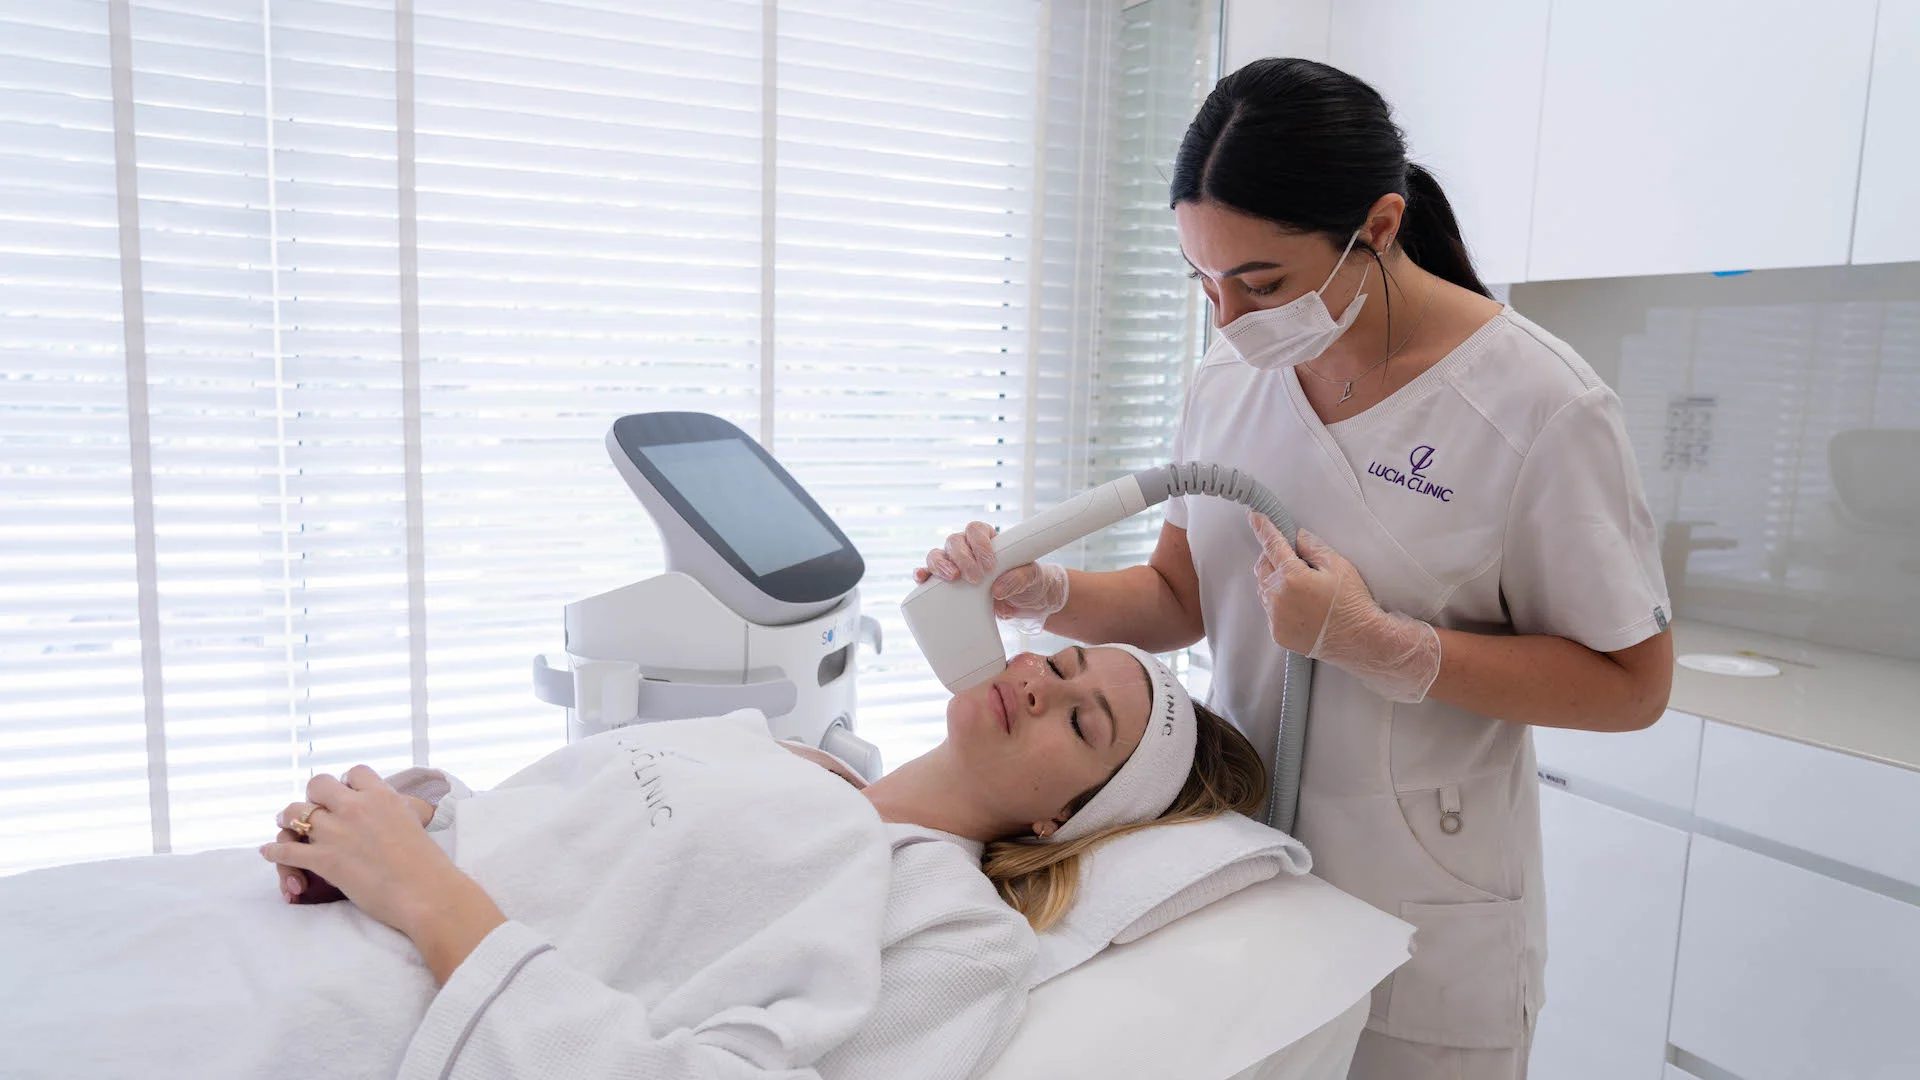 Non-surgical skin lifting treatments for glowy appearance - firm and lift skin with various effective non-invasive treatments without downtime or side effects.